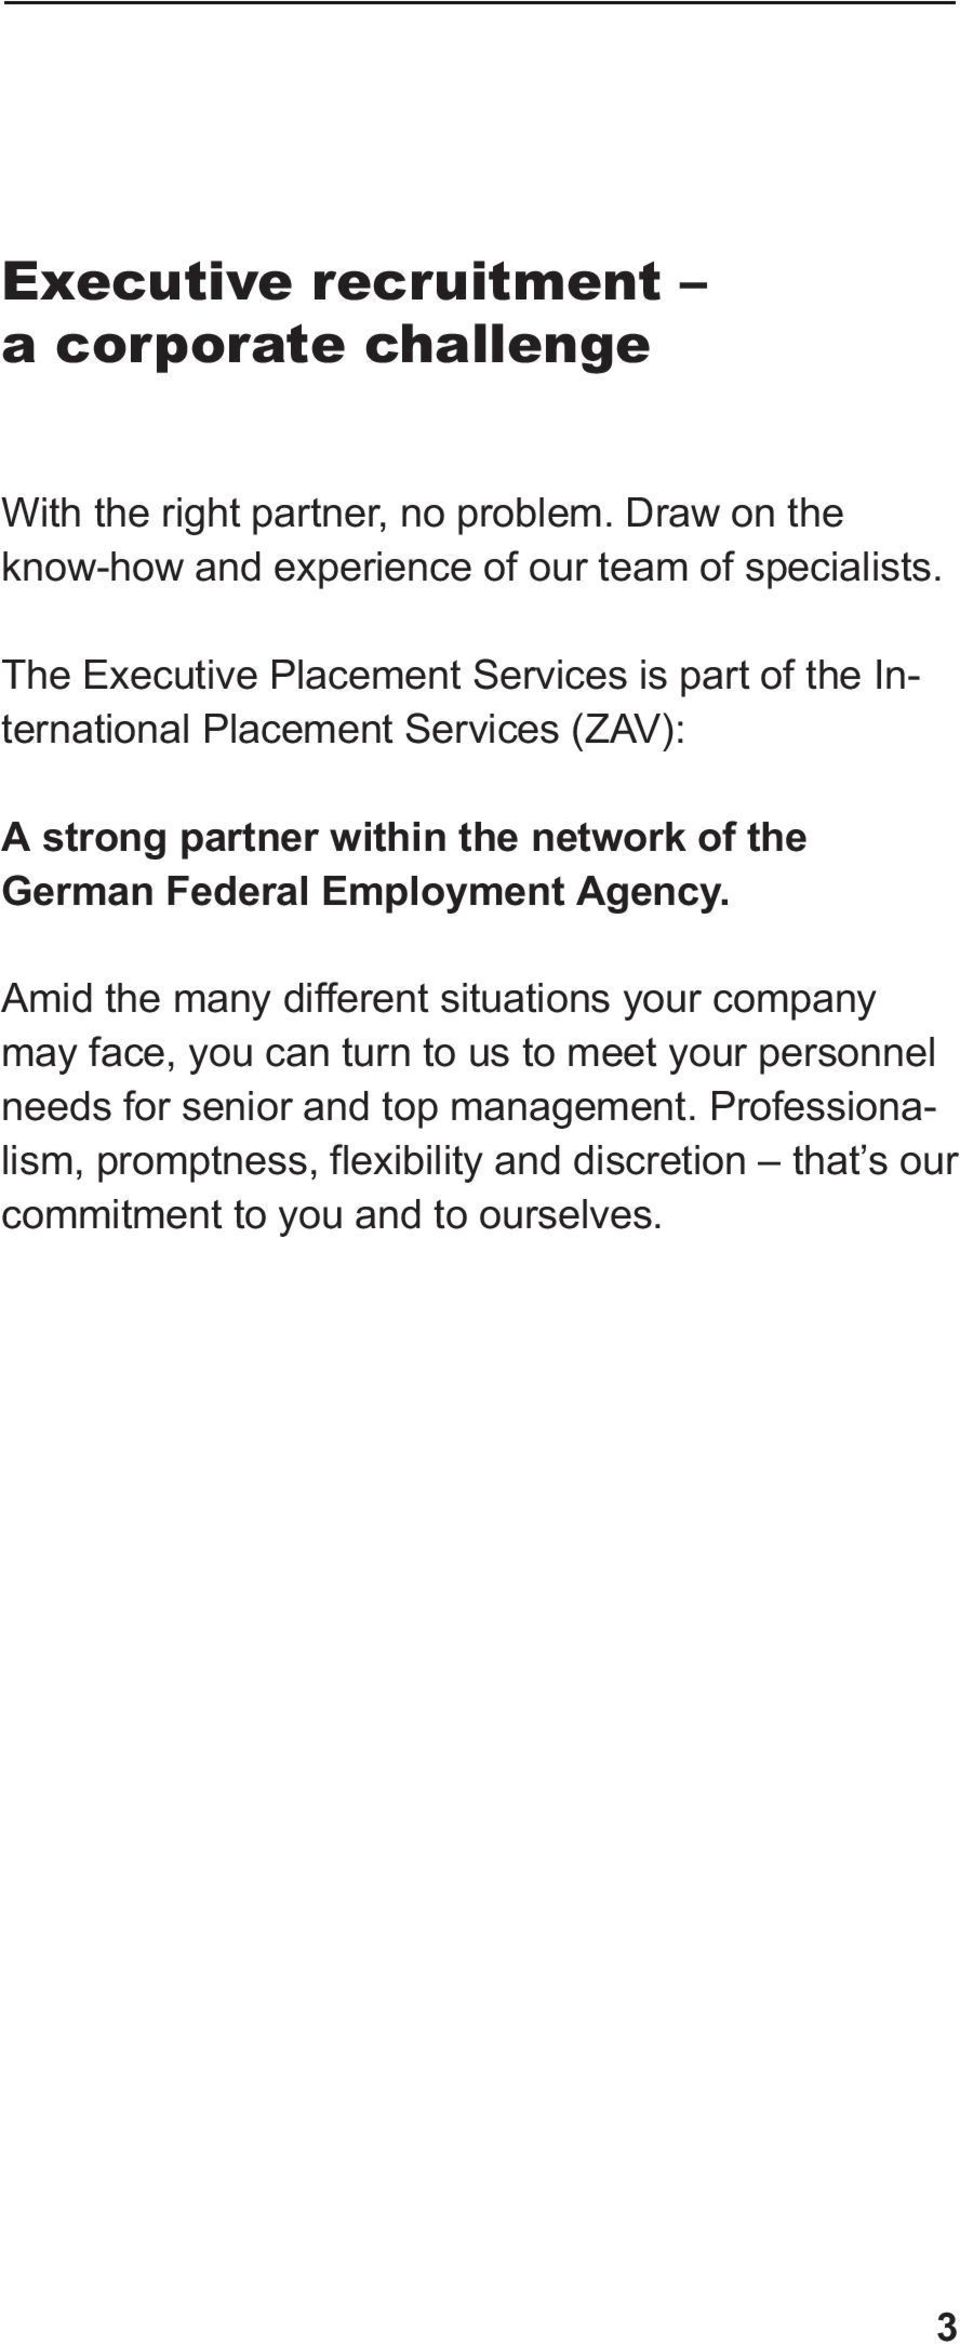 The Executive Placement Services is part of the International Placement Services (ZAV): A strong partner within the network of the German